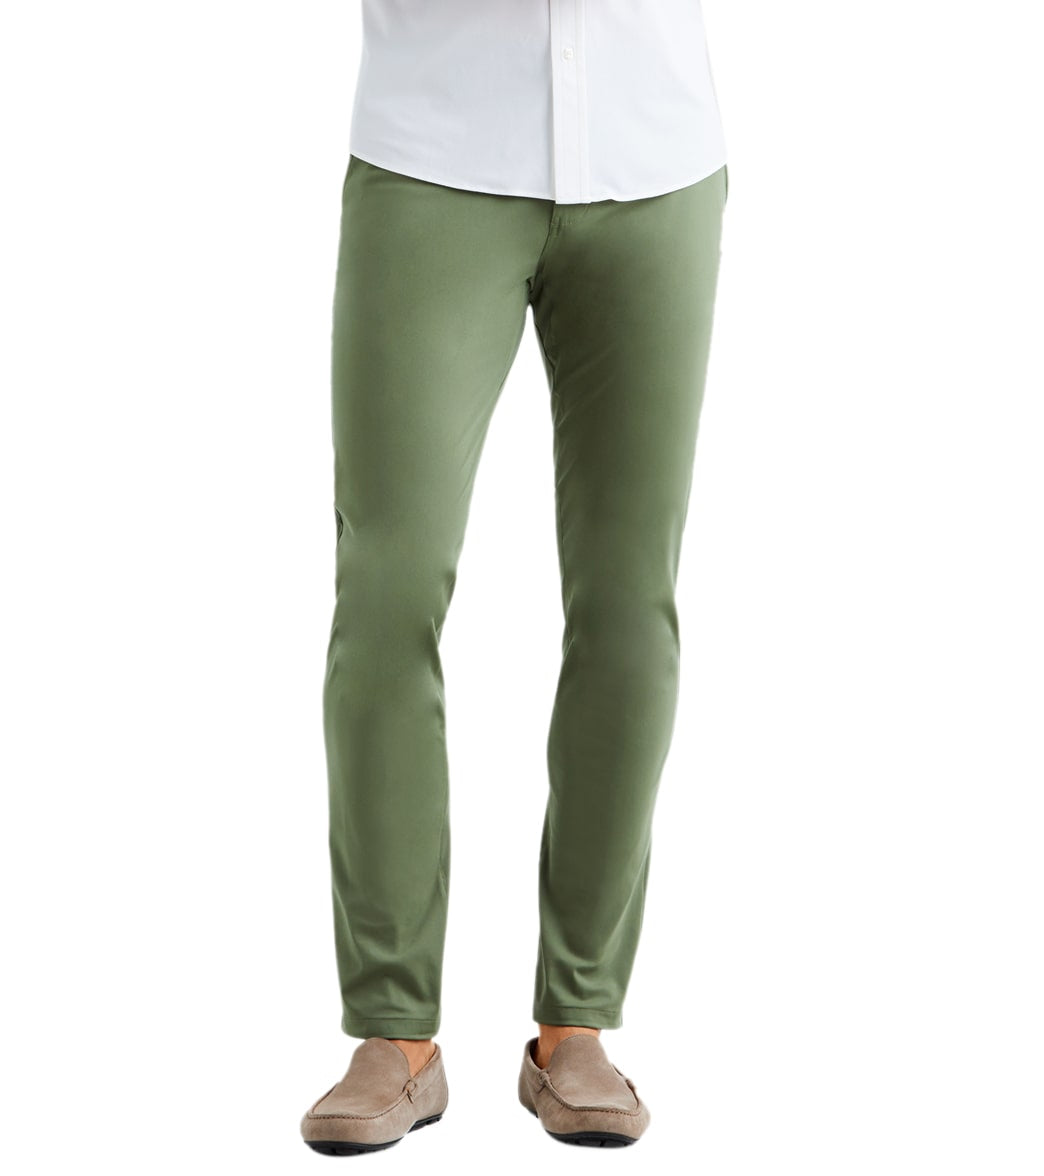 Men's Yoga Pants in Cotton Sateen for yoga and meditation